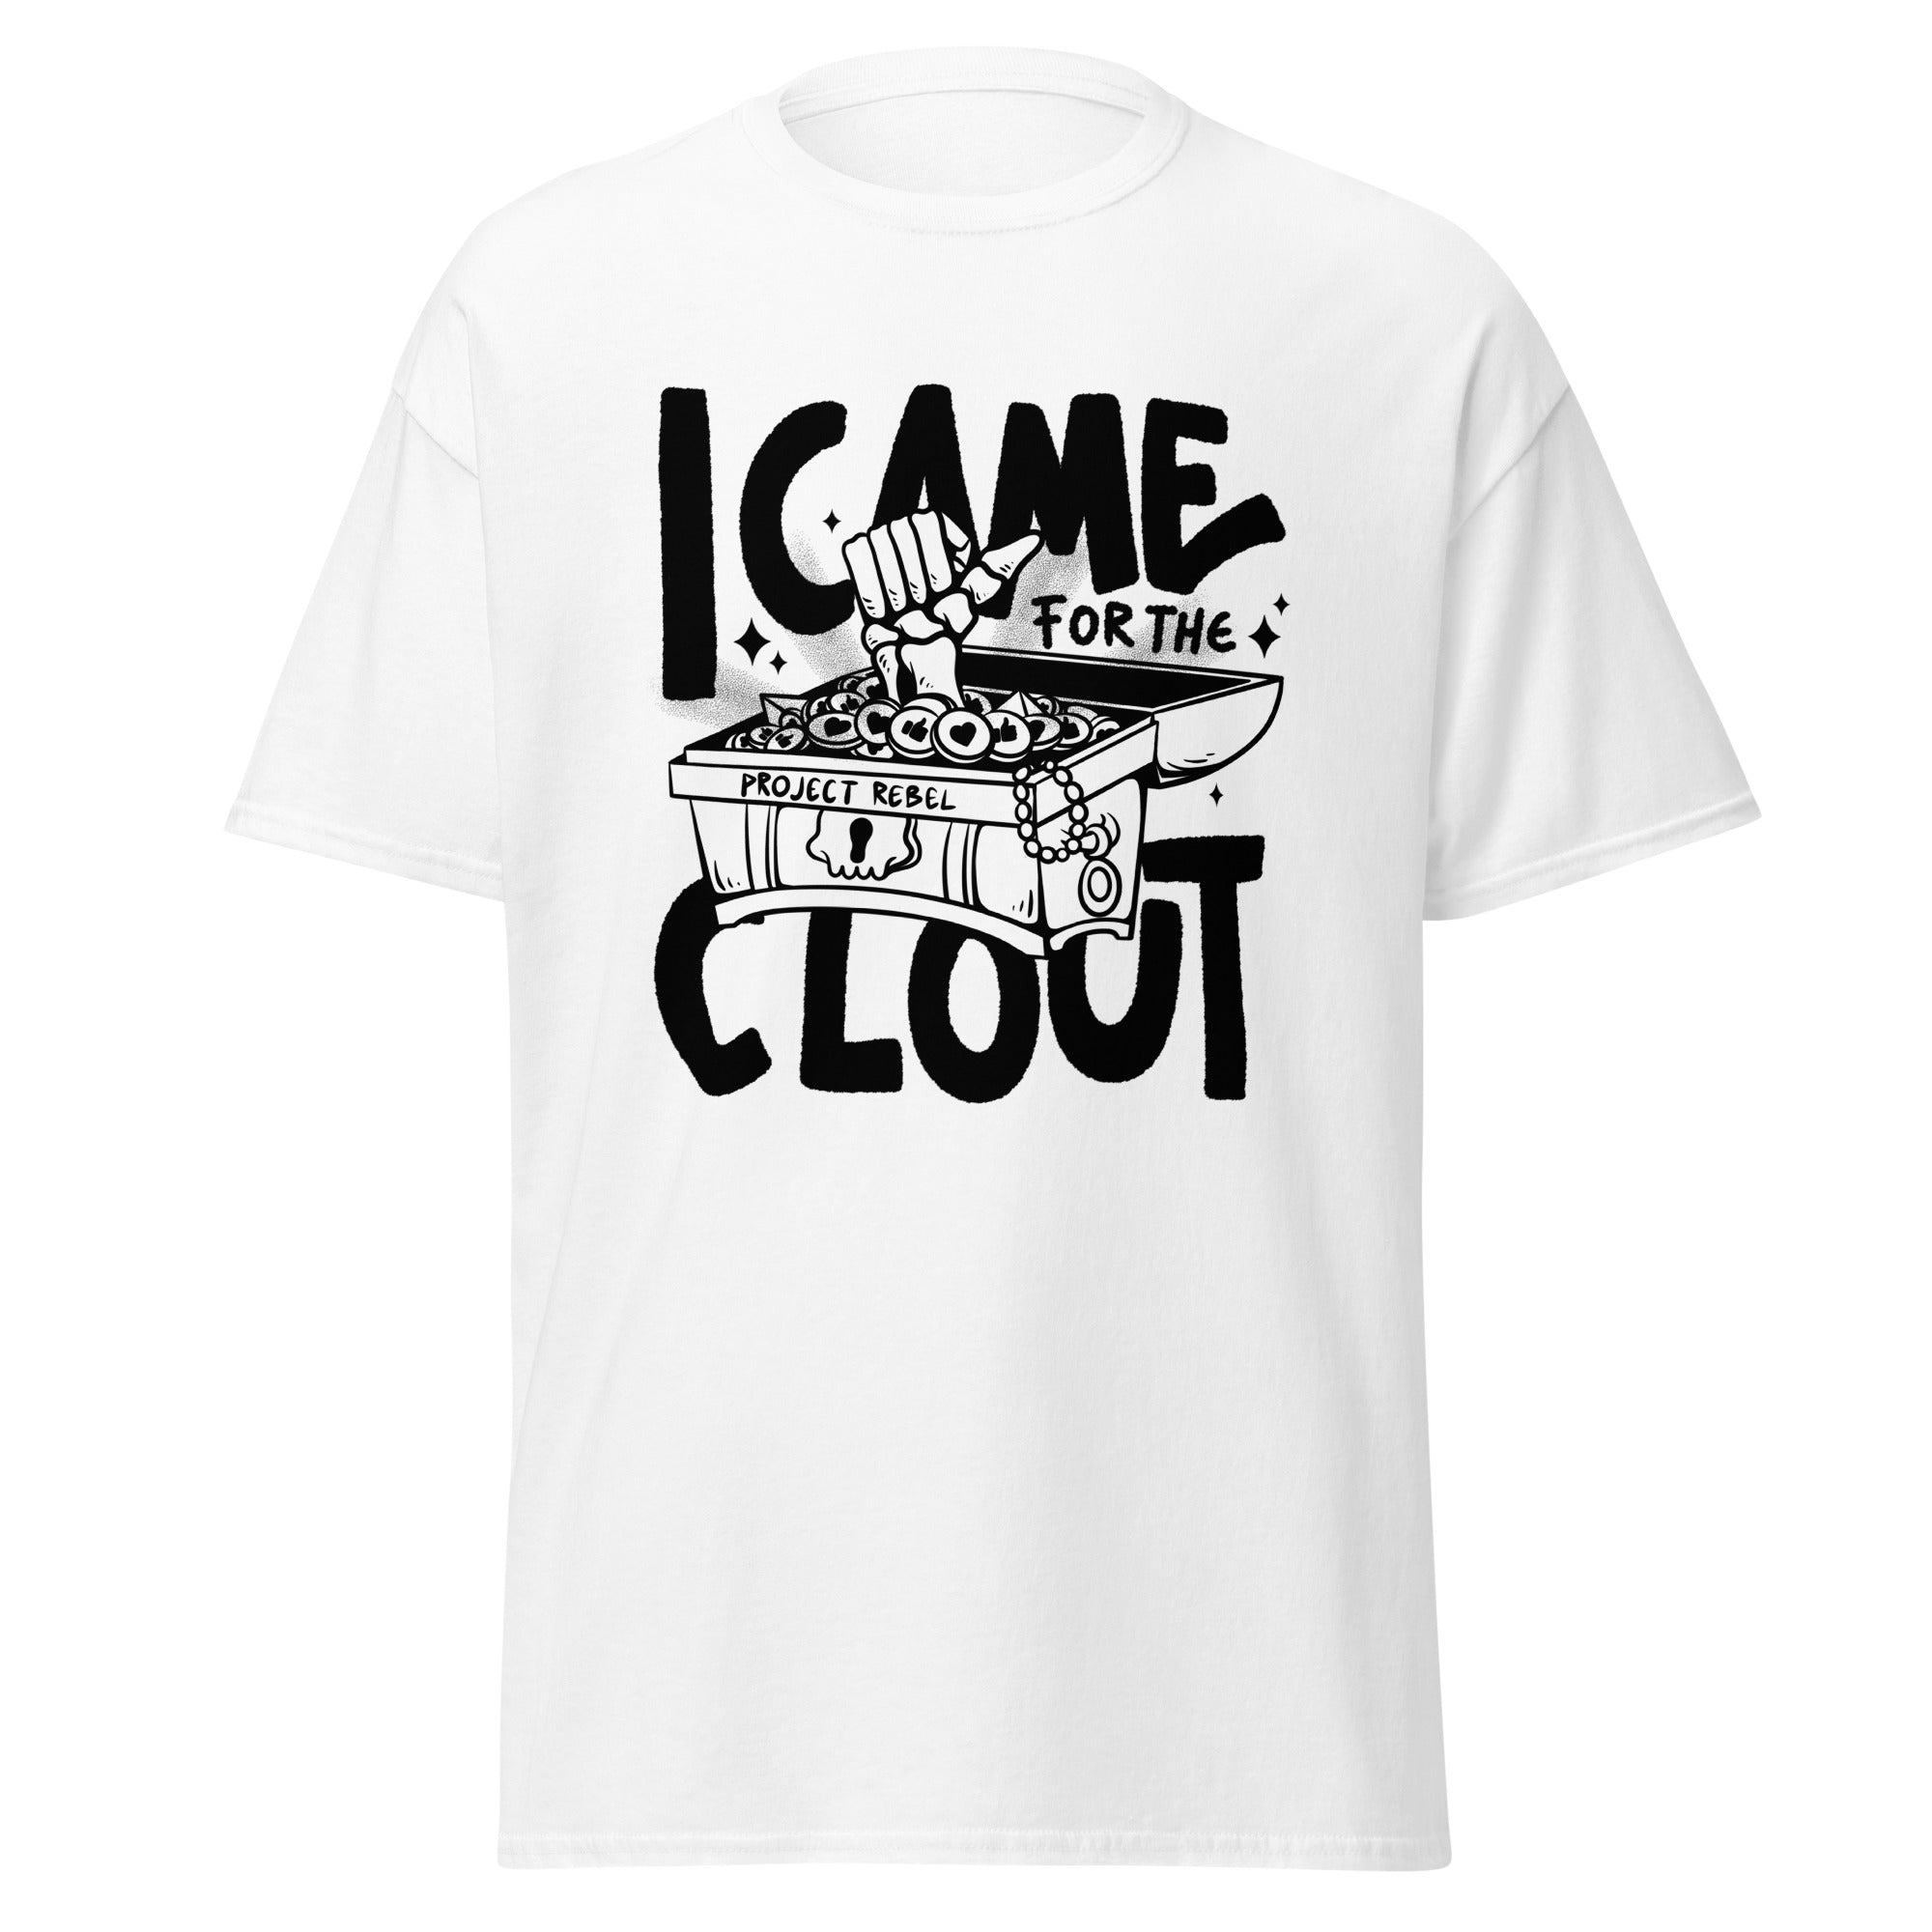 For the Clout T-Shirt - ProjectRebelClothing